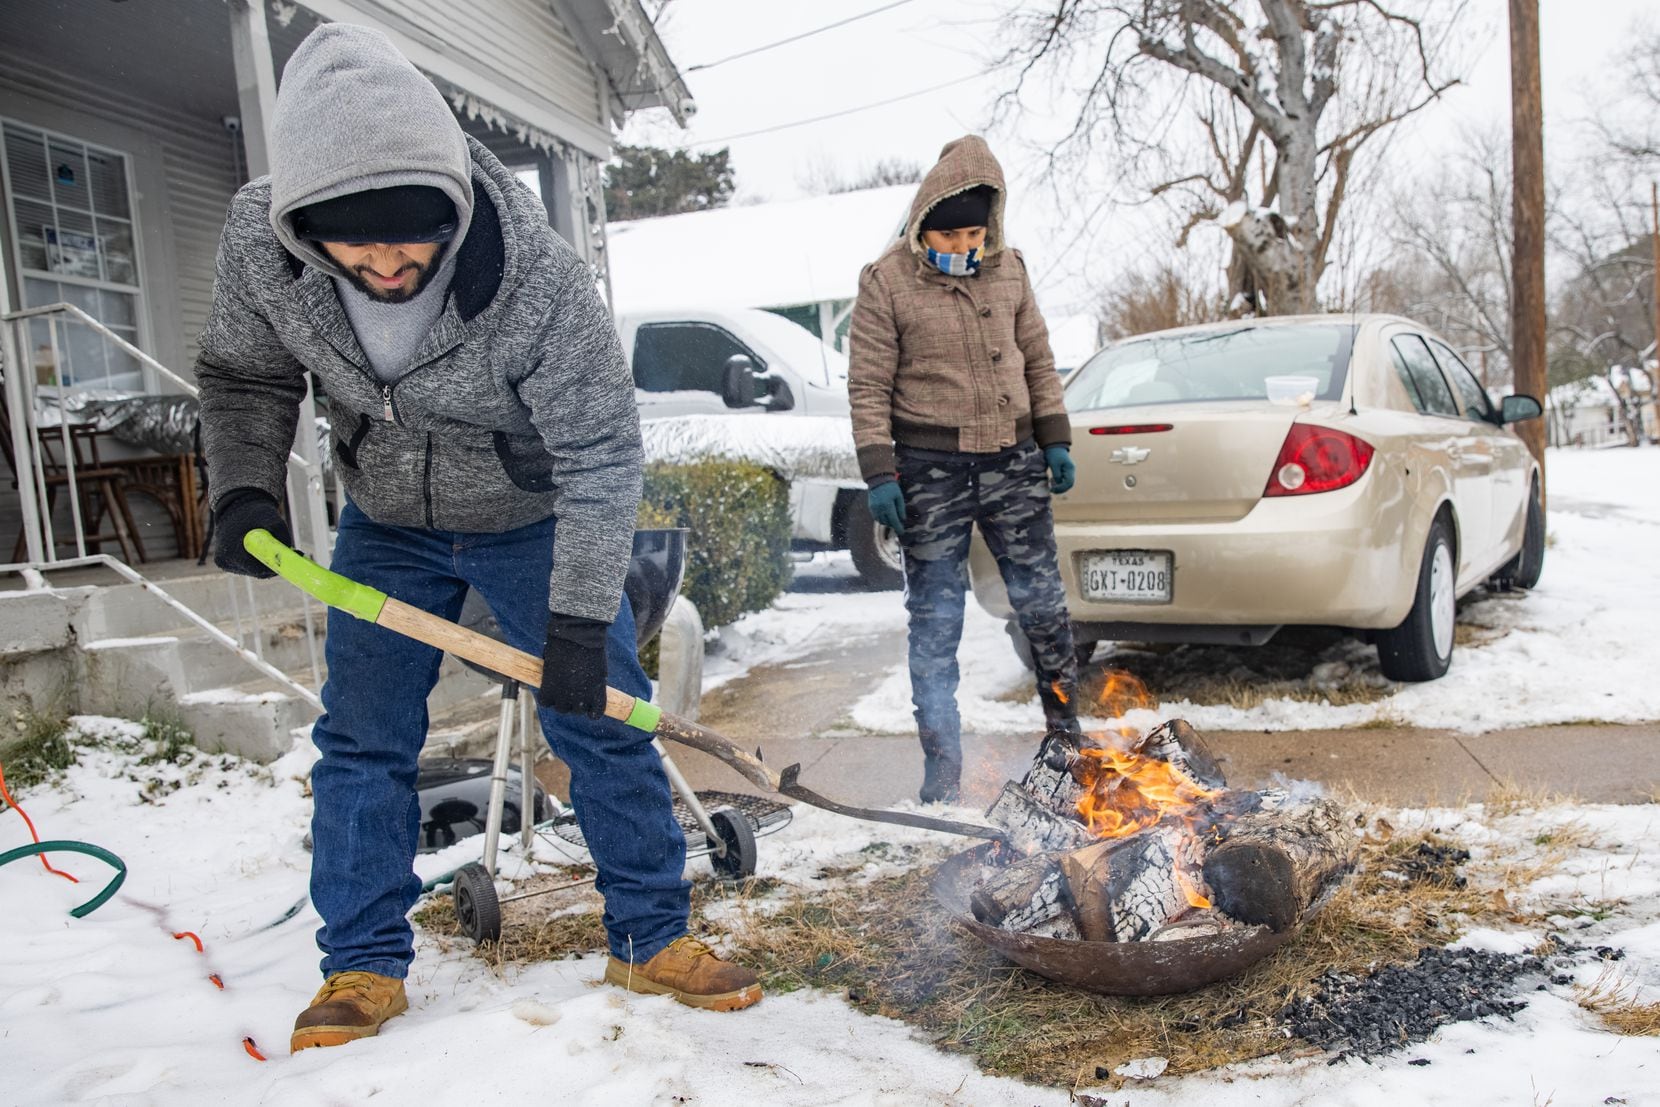 Leonel Solis (left) and Estefani Garcia get ready to cook outside of their home in East...